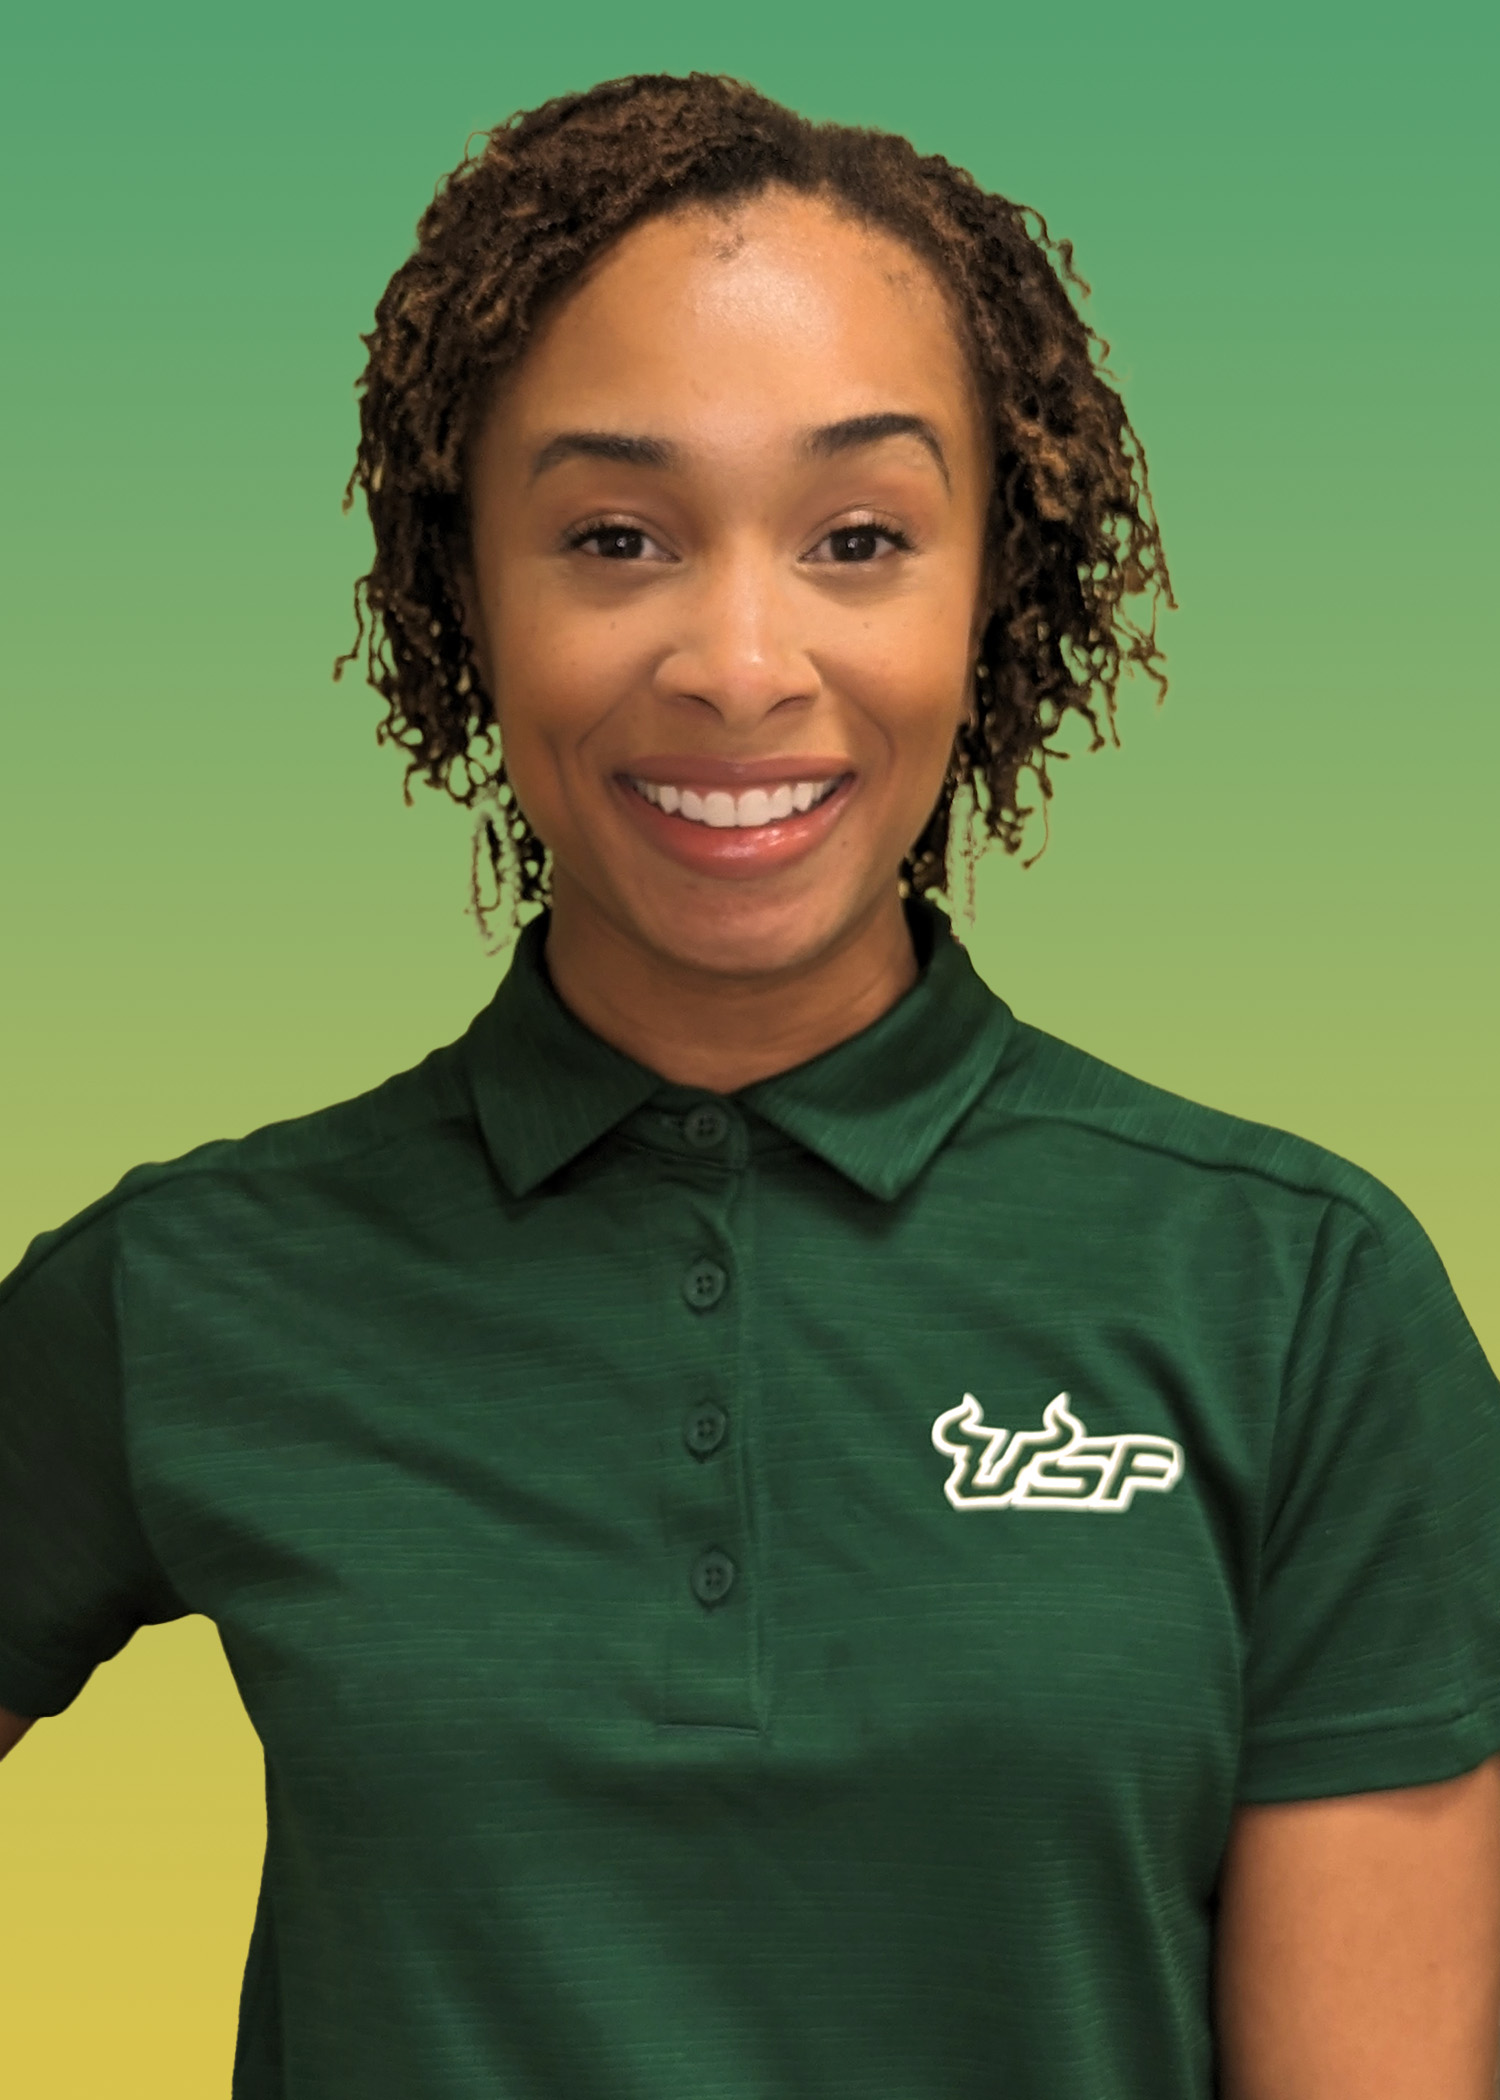 Portrait of Desarae Pointer wearing a green USF polo shirt. 